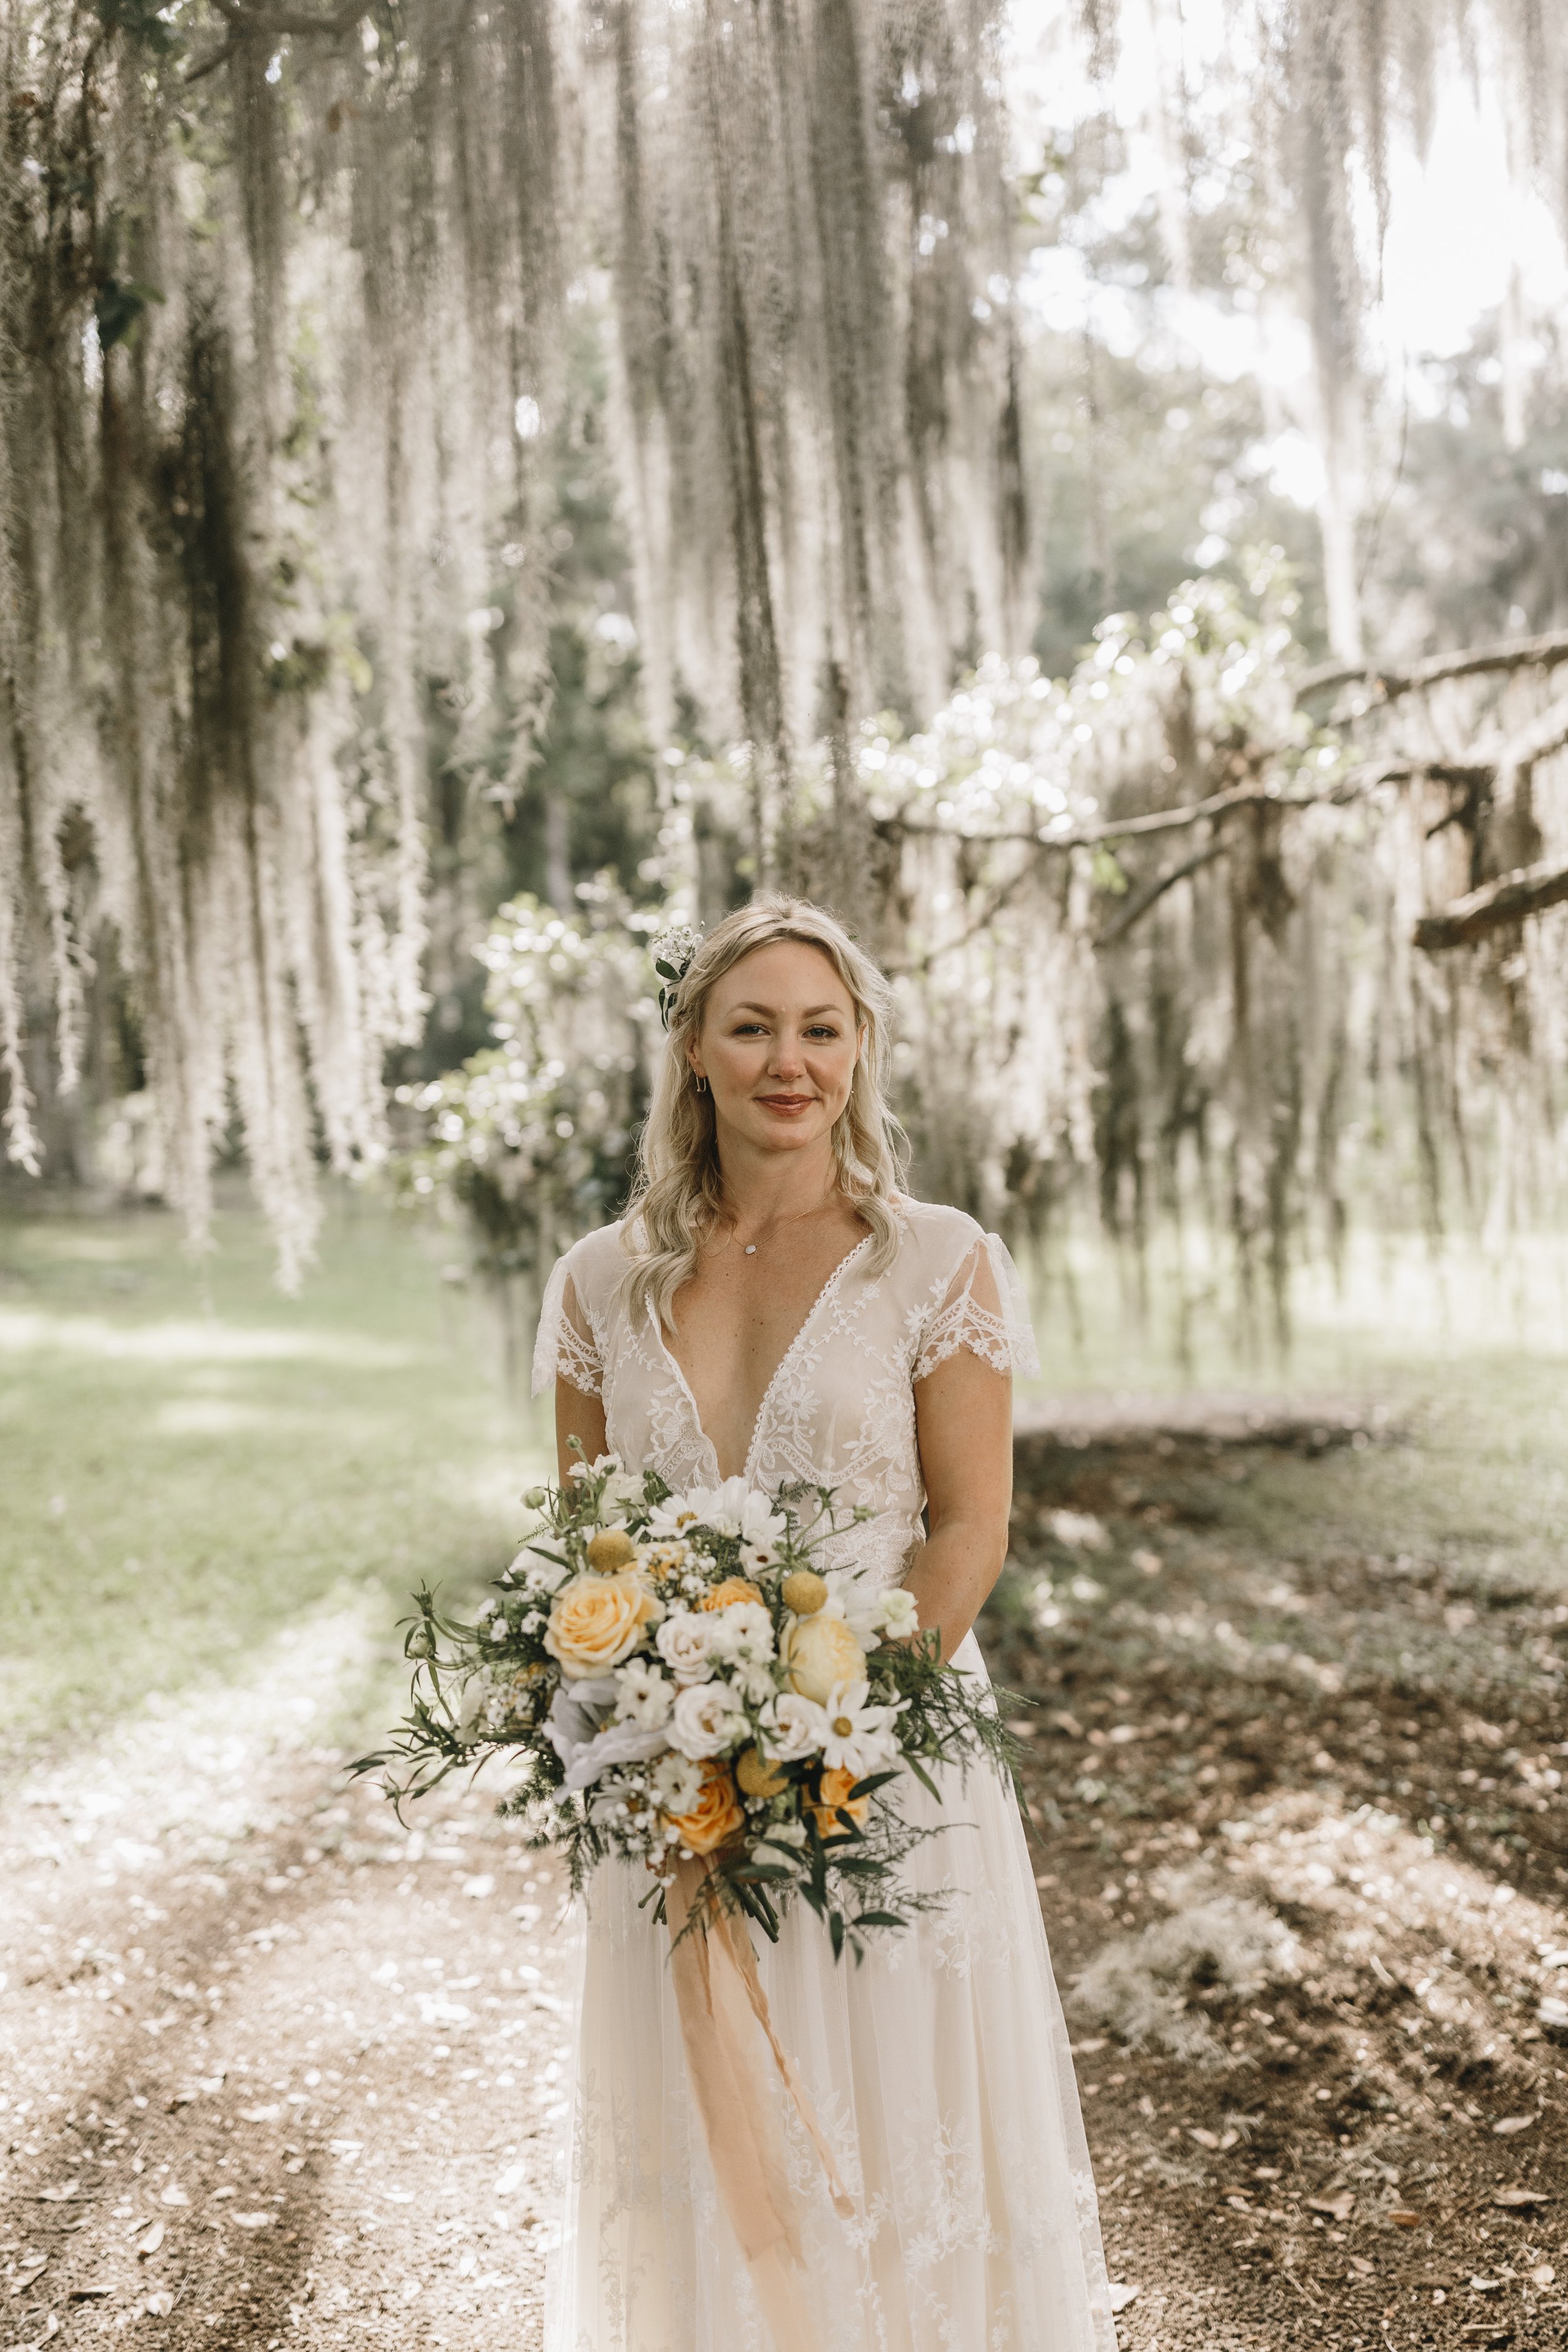 ivory-and-beau-wedding-and-florals-southern-wedding-savannah-florist-savannah-wedding-savannah-wedding-planner-the-wyld-dock-bar-historic-savannah-georgia-wedding-flowers-wedding-blog-wedding-inspiration-LAUREN+NICK_WEDDING-349.jpg